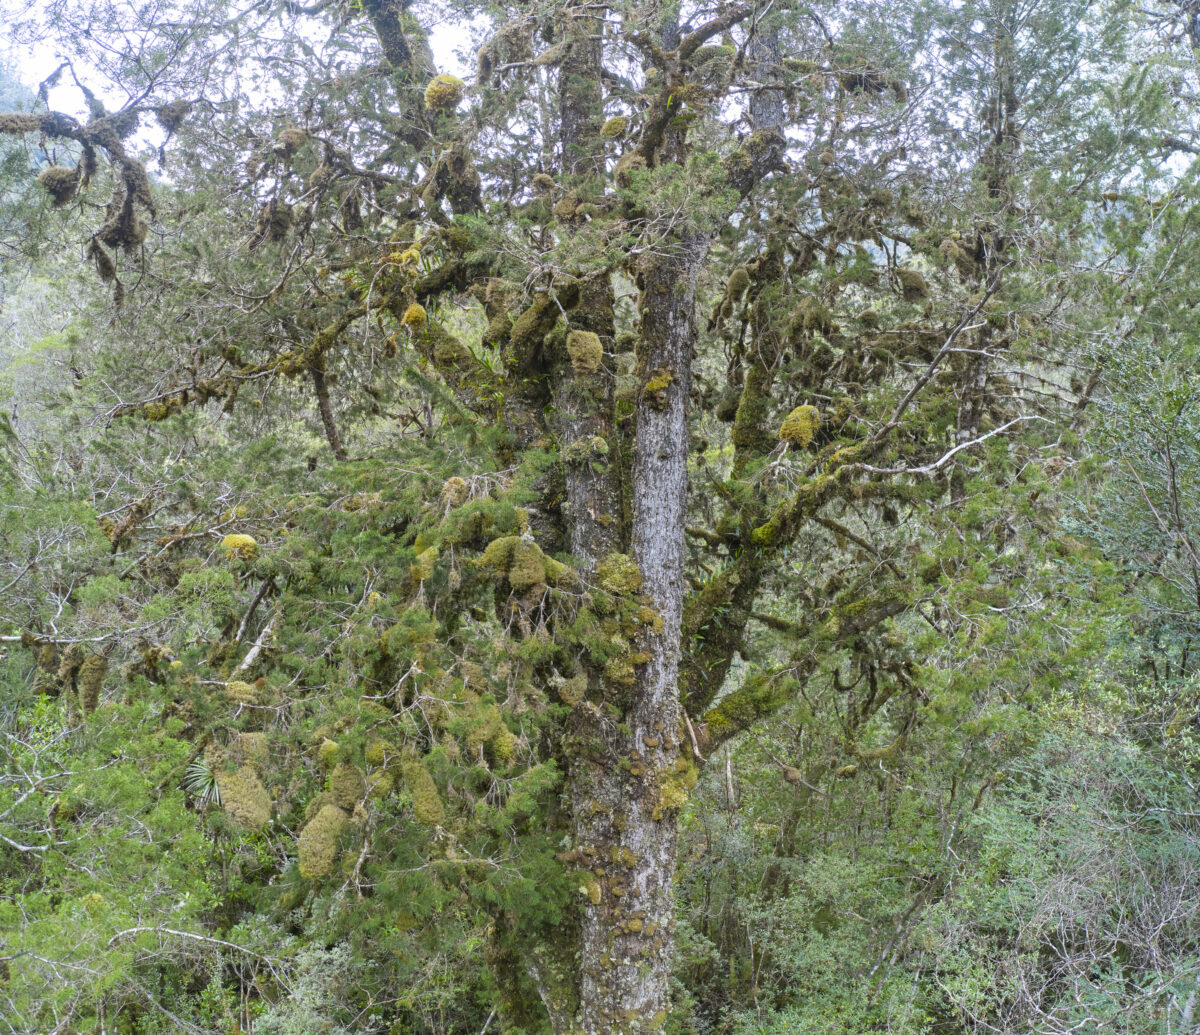 Canopy of one of the ancient Huon pines festooned with epiphytic bryophytes and lichens. 